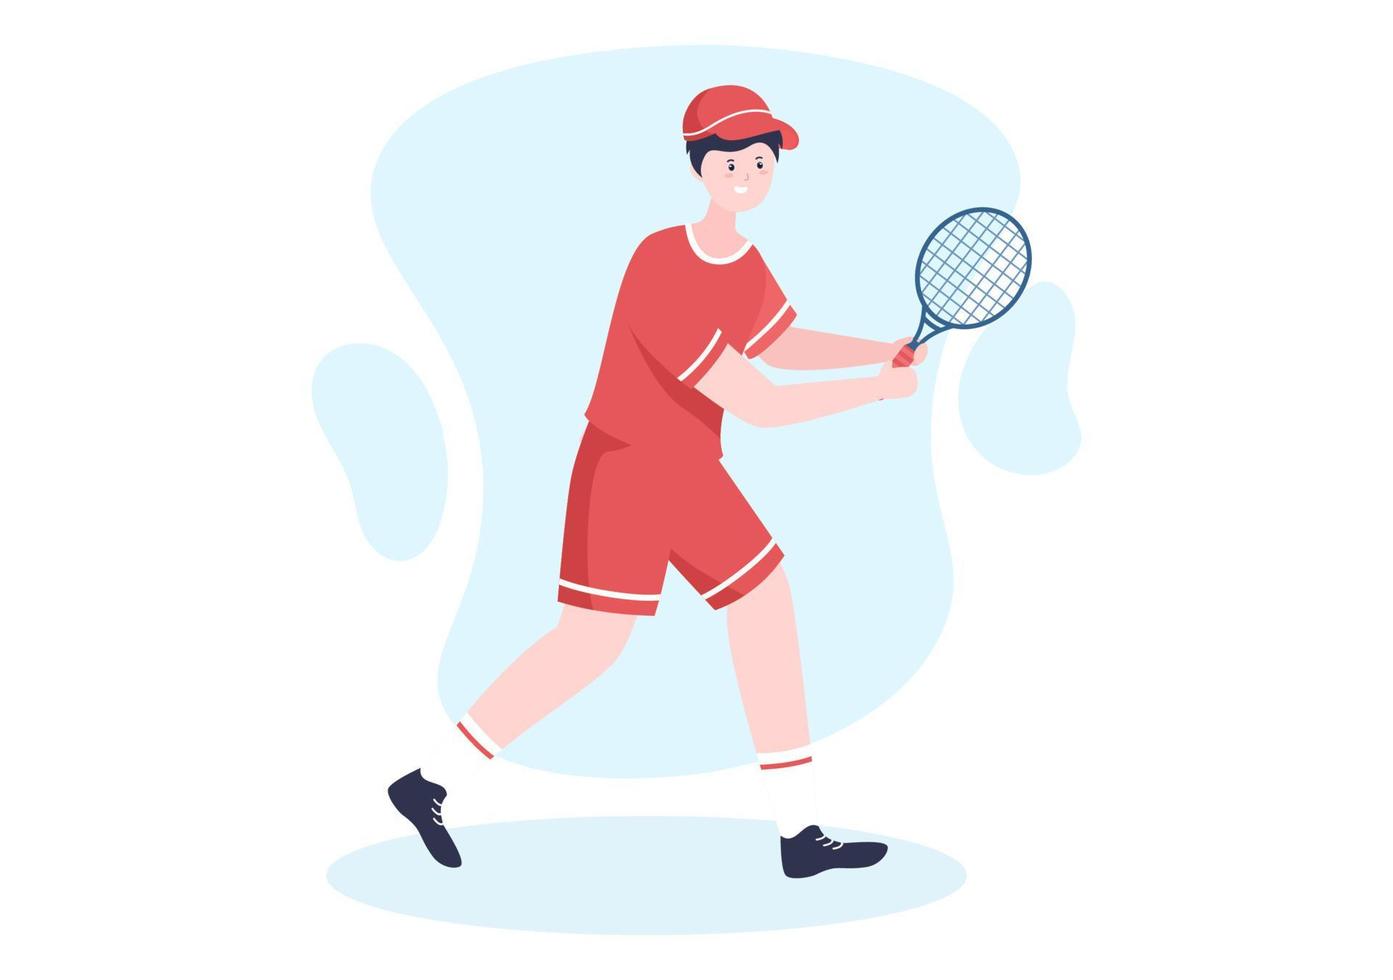 Tennis Player with Racket in Hand and Ball on Court. People doing Sports Match in Flat Cartoon Illustration vector